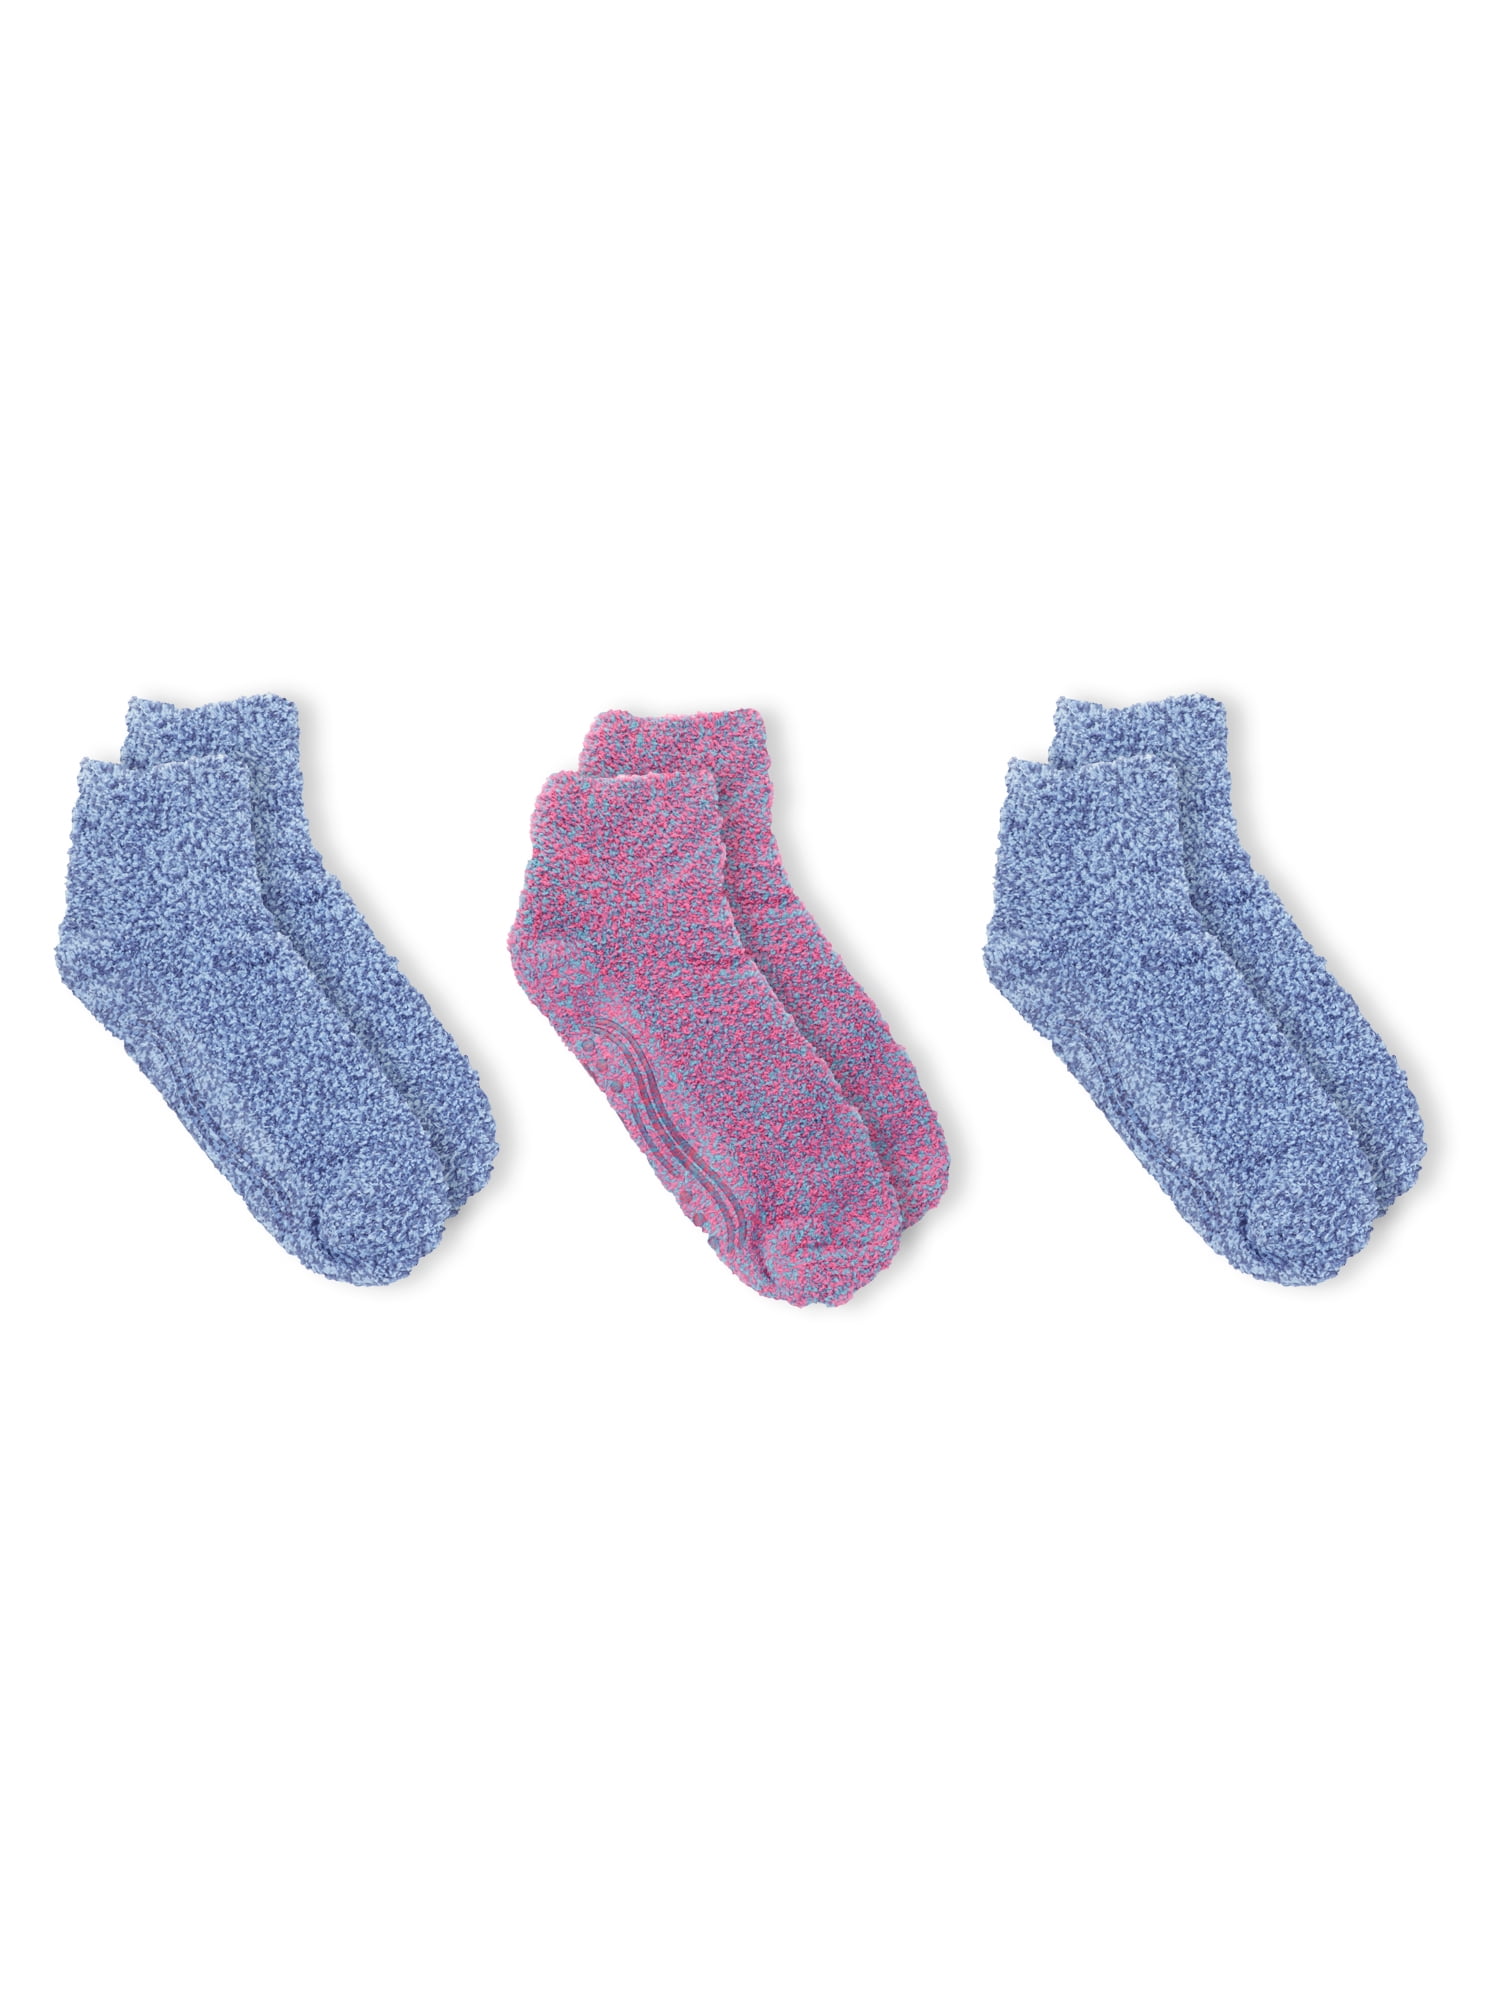 Dr. Scholl's Women's Soothing Spa Low Cut Gripper Socks, 3 Pack 